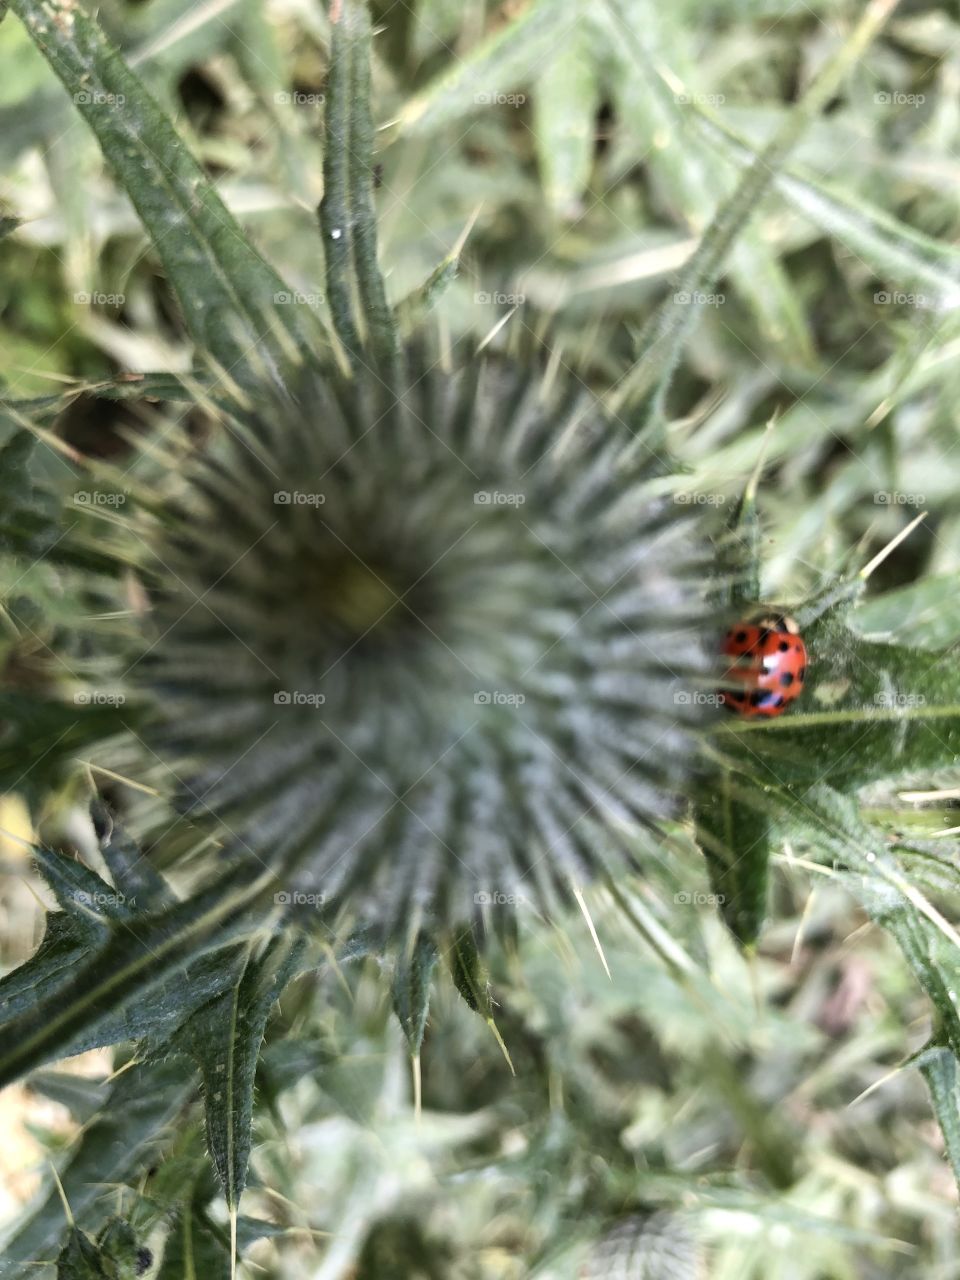 Some wild prickly nature with a nice little red and black spotted ladybird.